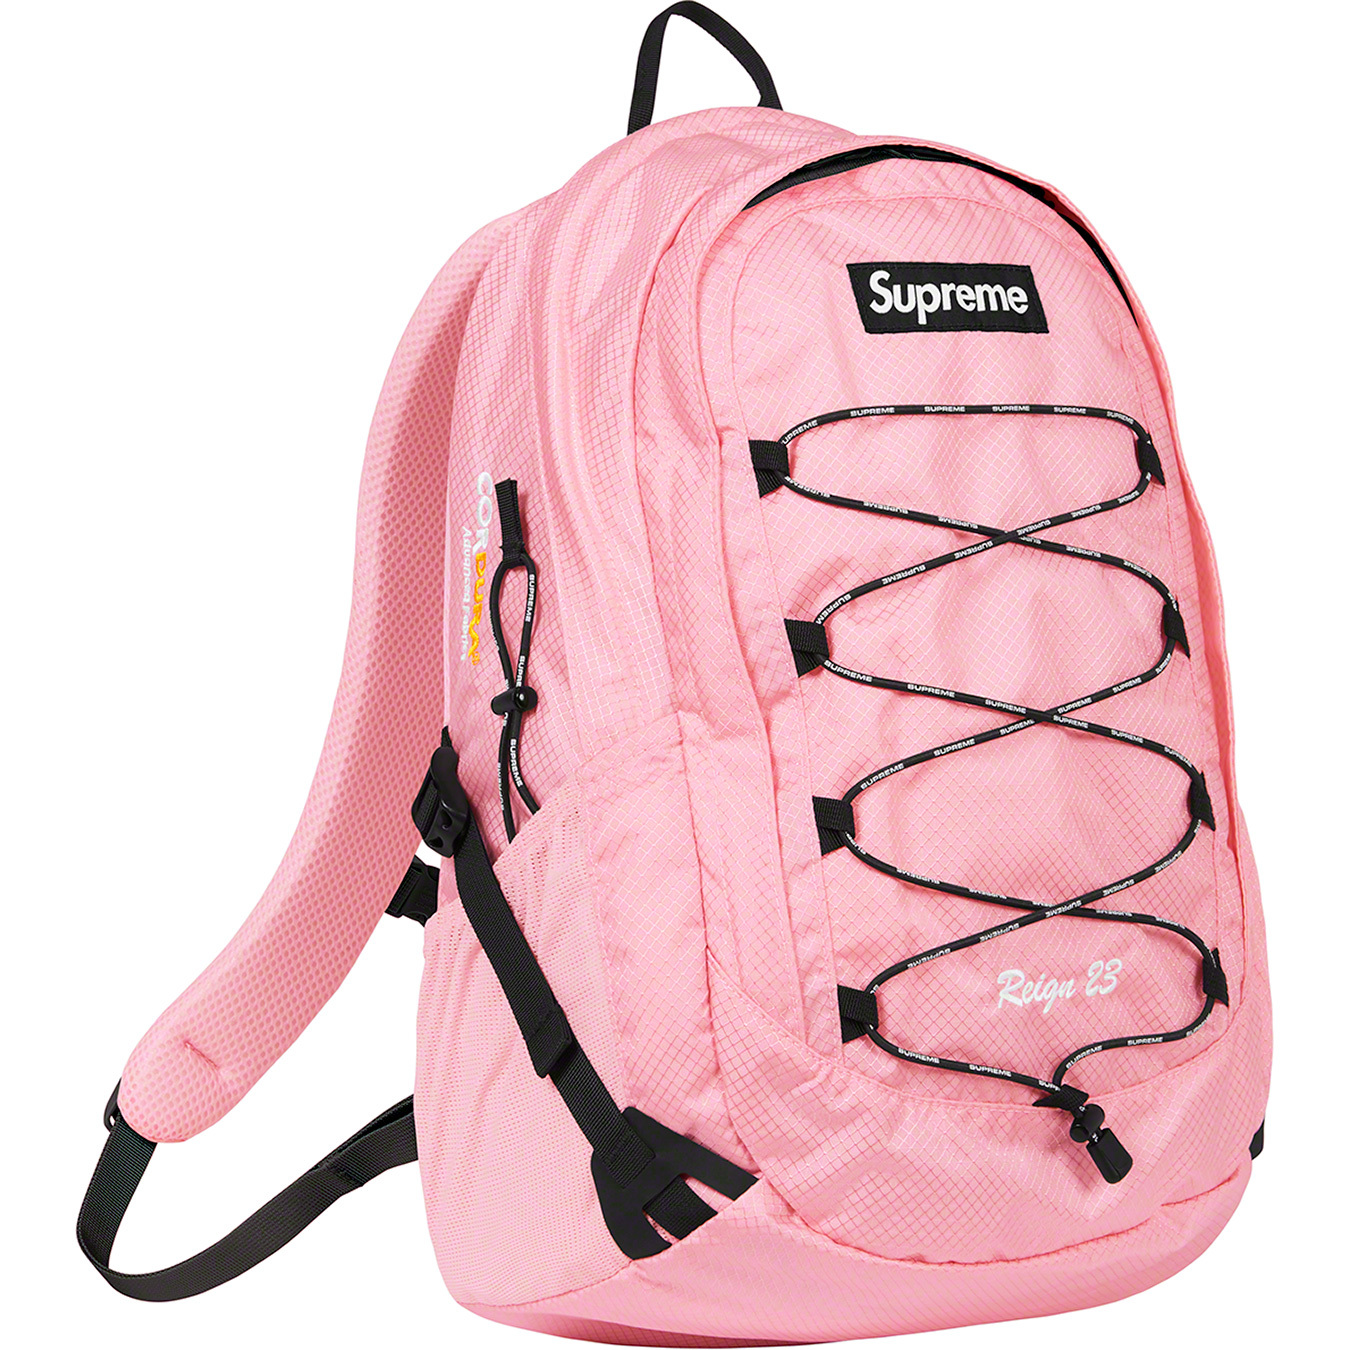 Duffle Bag - Spring/Summer 2022 Preview – Supreme